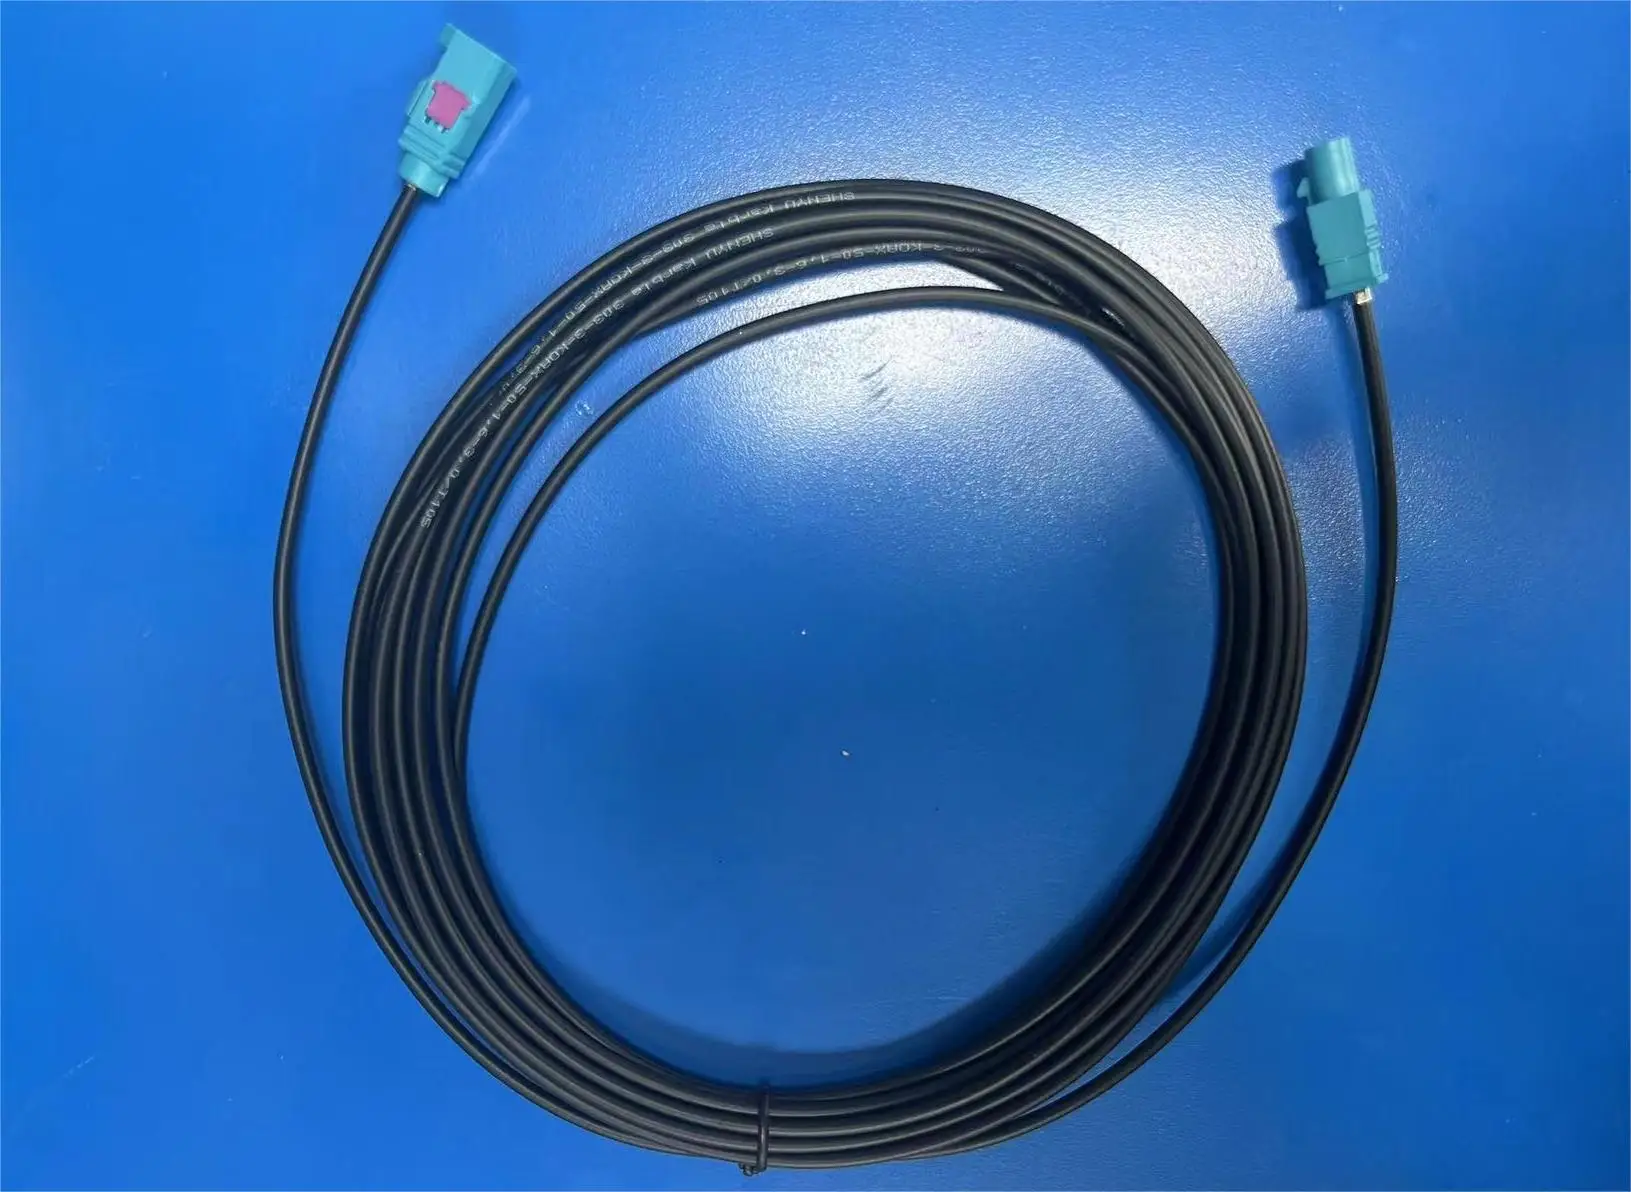 FAKRA CABLE,  FAKRA JACK TO FAKRA PLUG JUMPER,  Z CODE TO Z CODE, SUPER LONG, LENGTH UP TO 8M, FREQUENCY UP TO 6GHZ onkar car gps position locate antenna fakra sma bnc fakra fakra c rns510 gps receiver